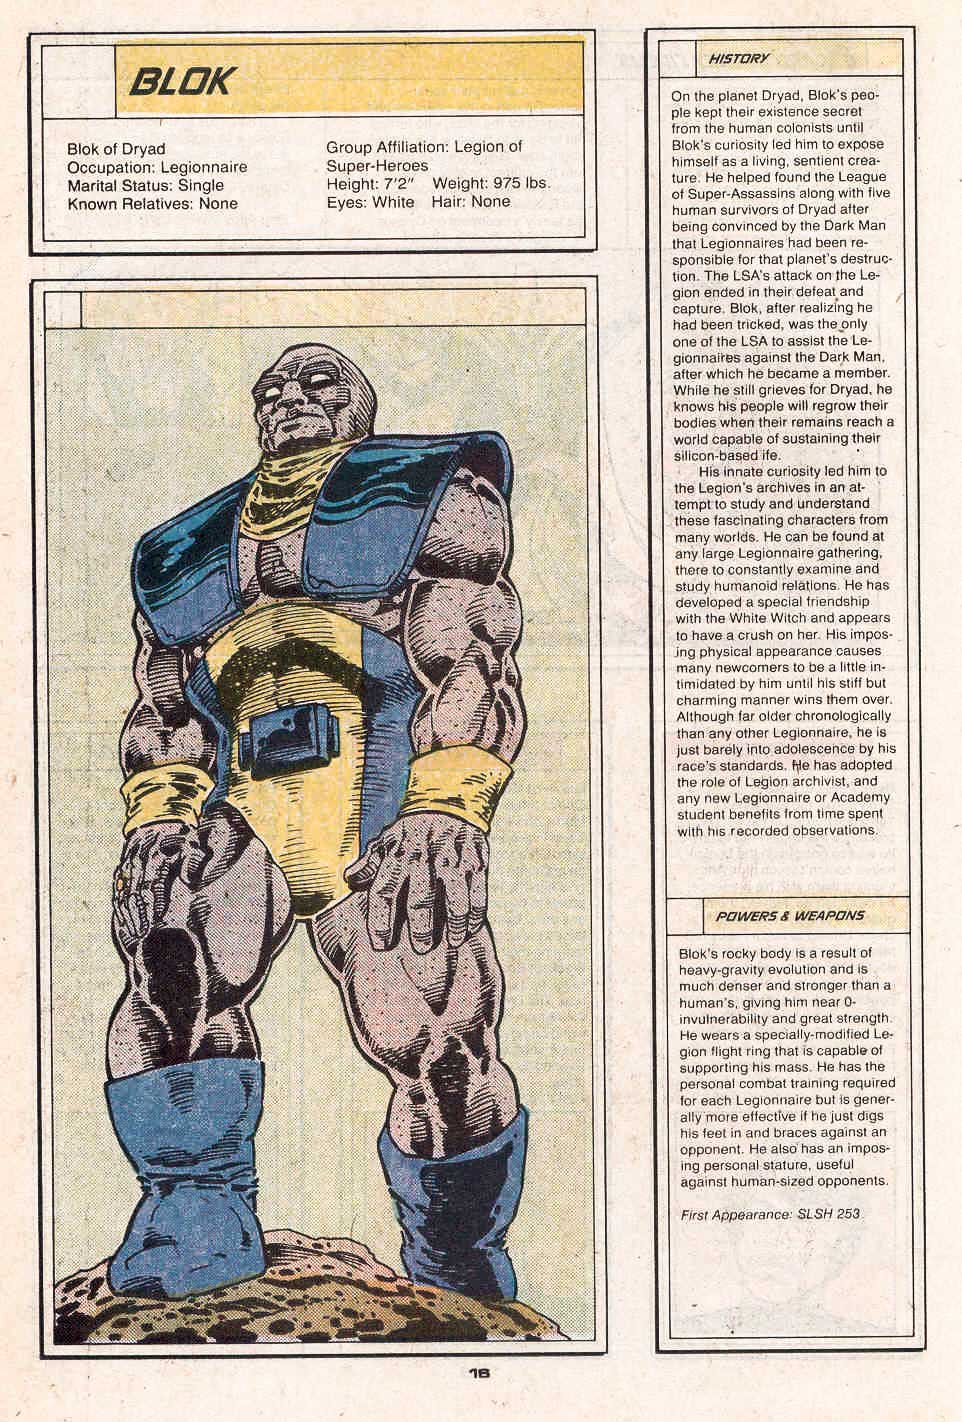 Blok by Pat Broderick - Who's Who in the Legion of Super-Heroes #1